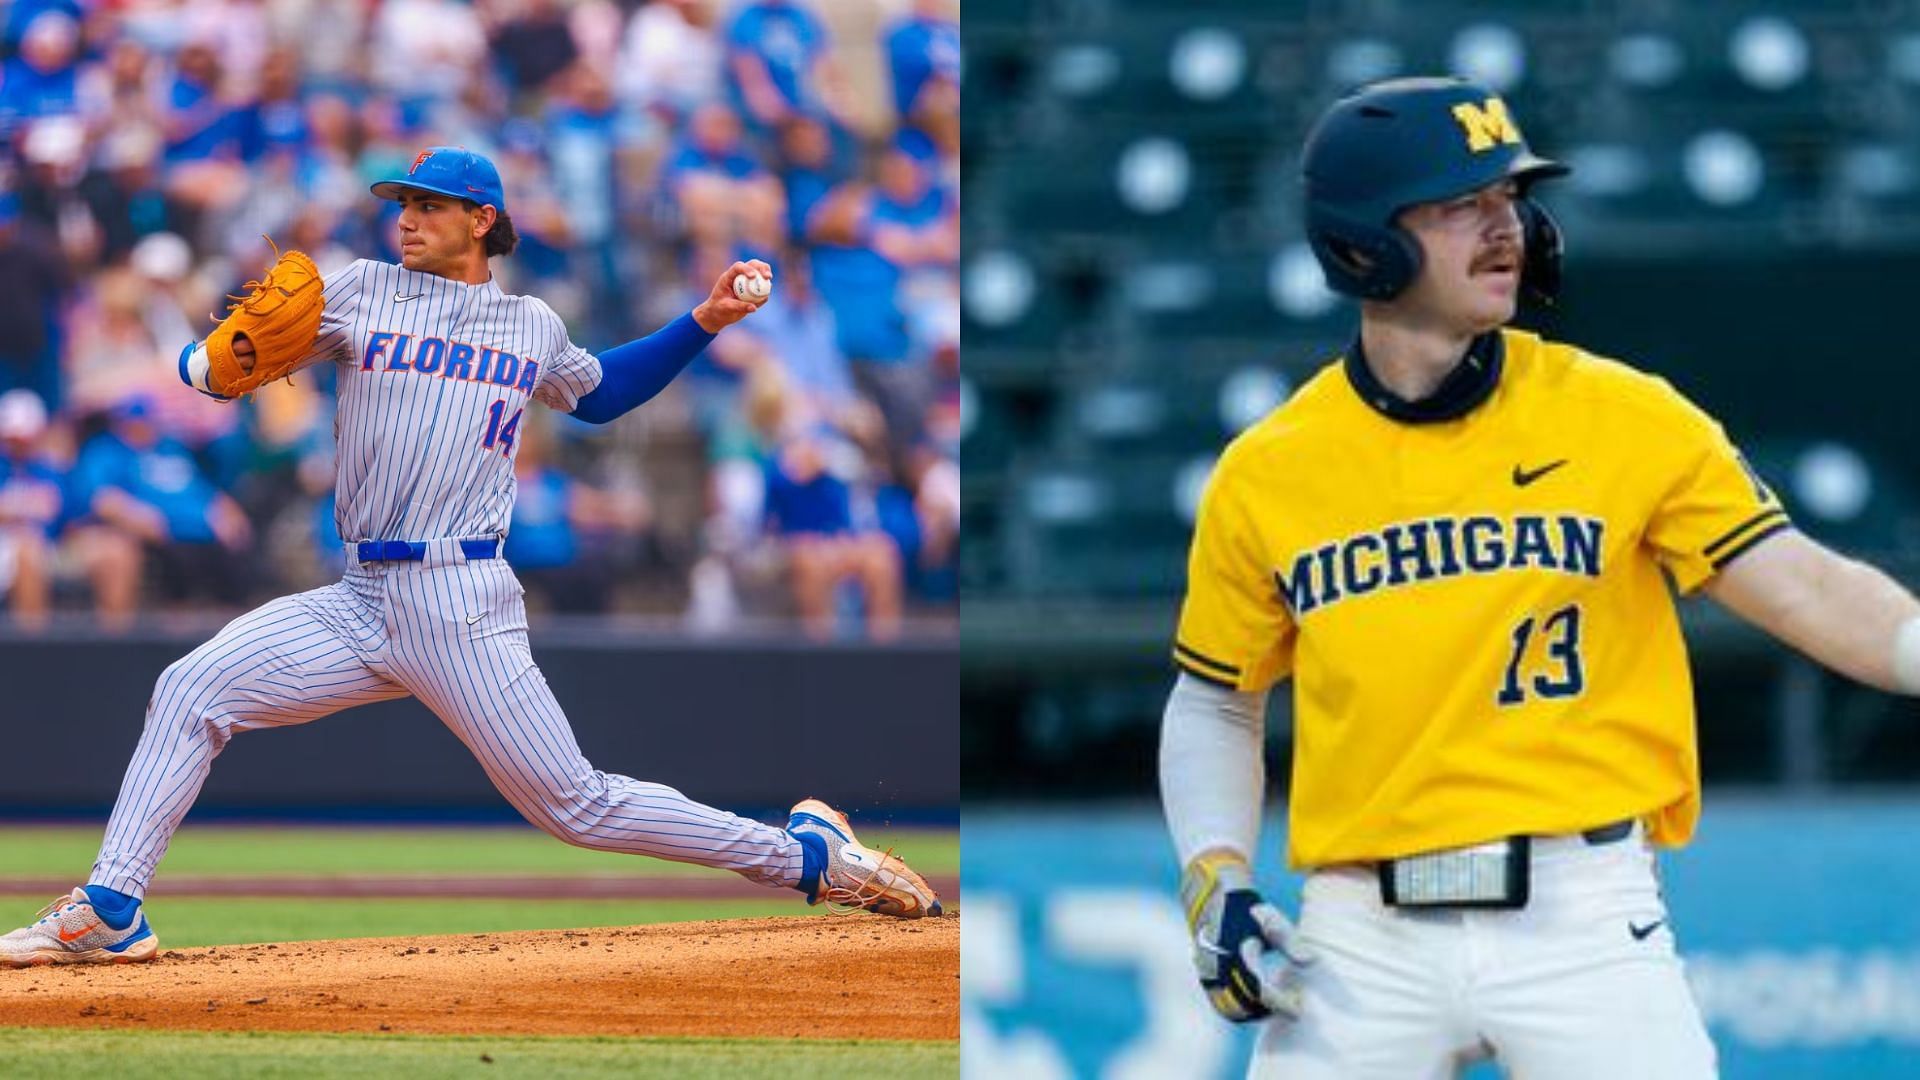 The college baseball belts are making some people confused